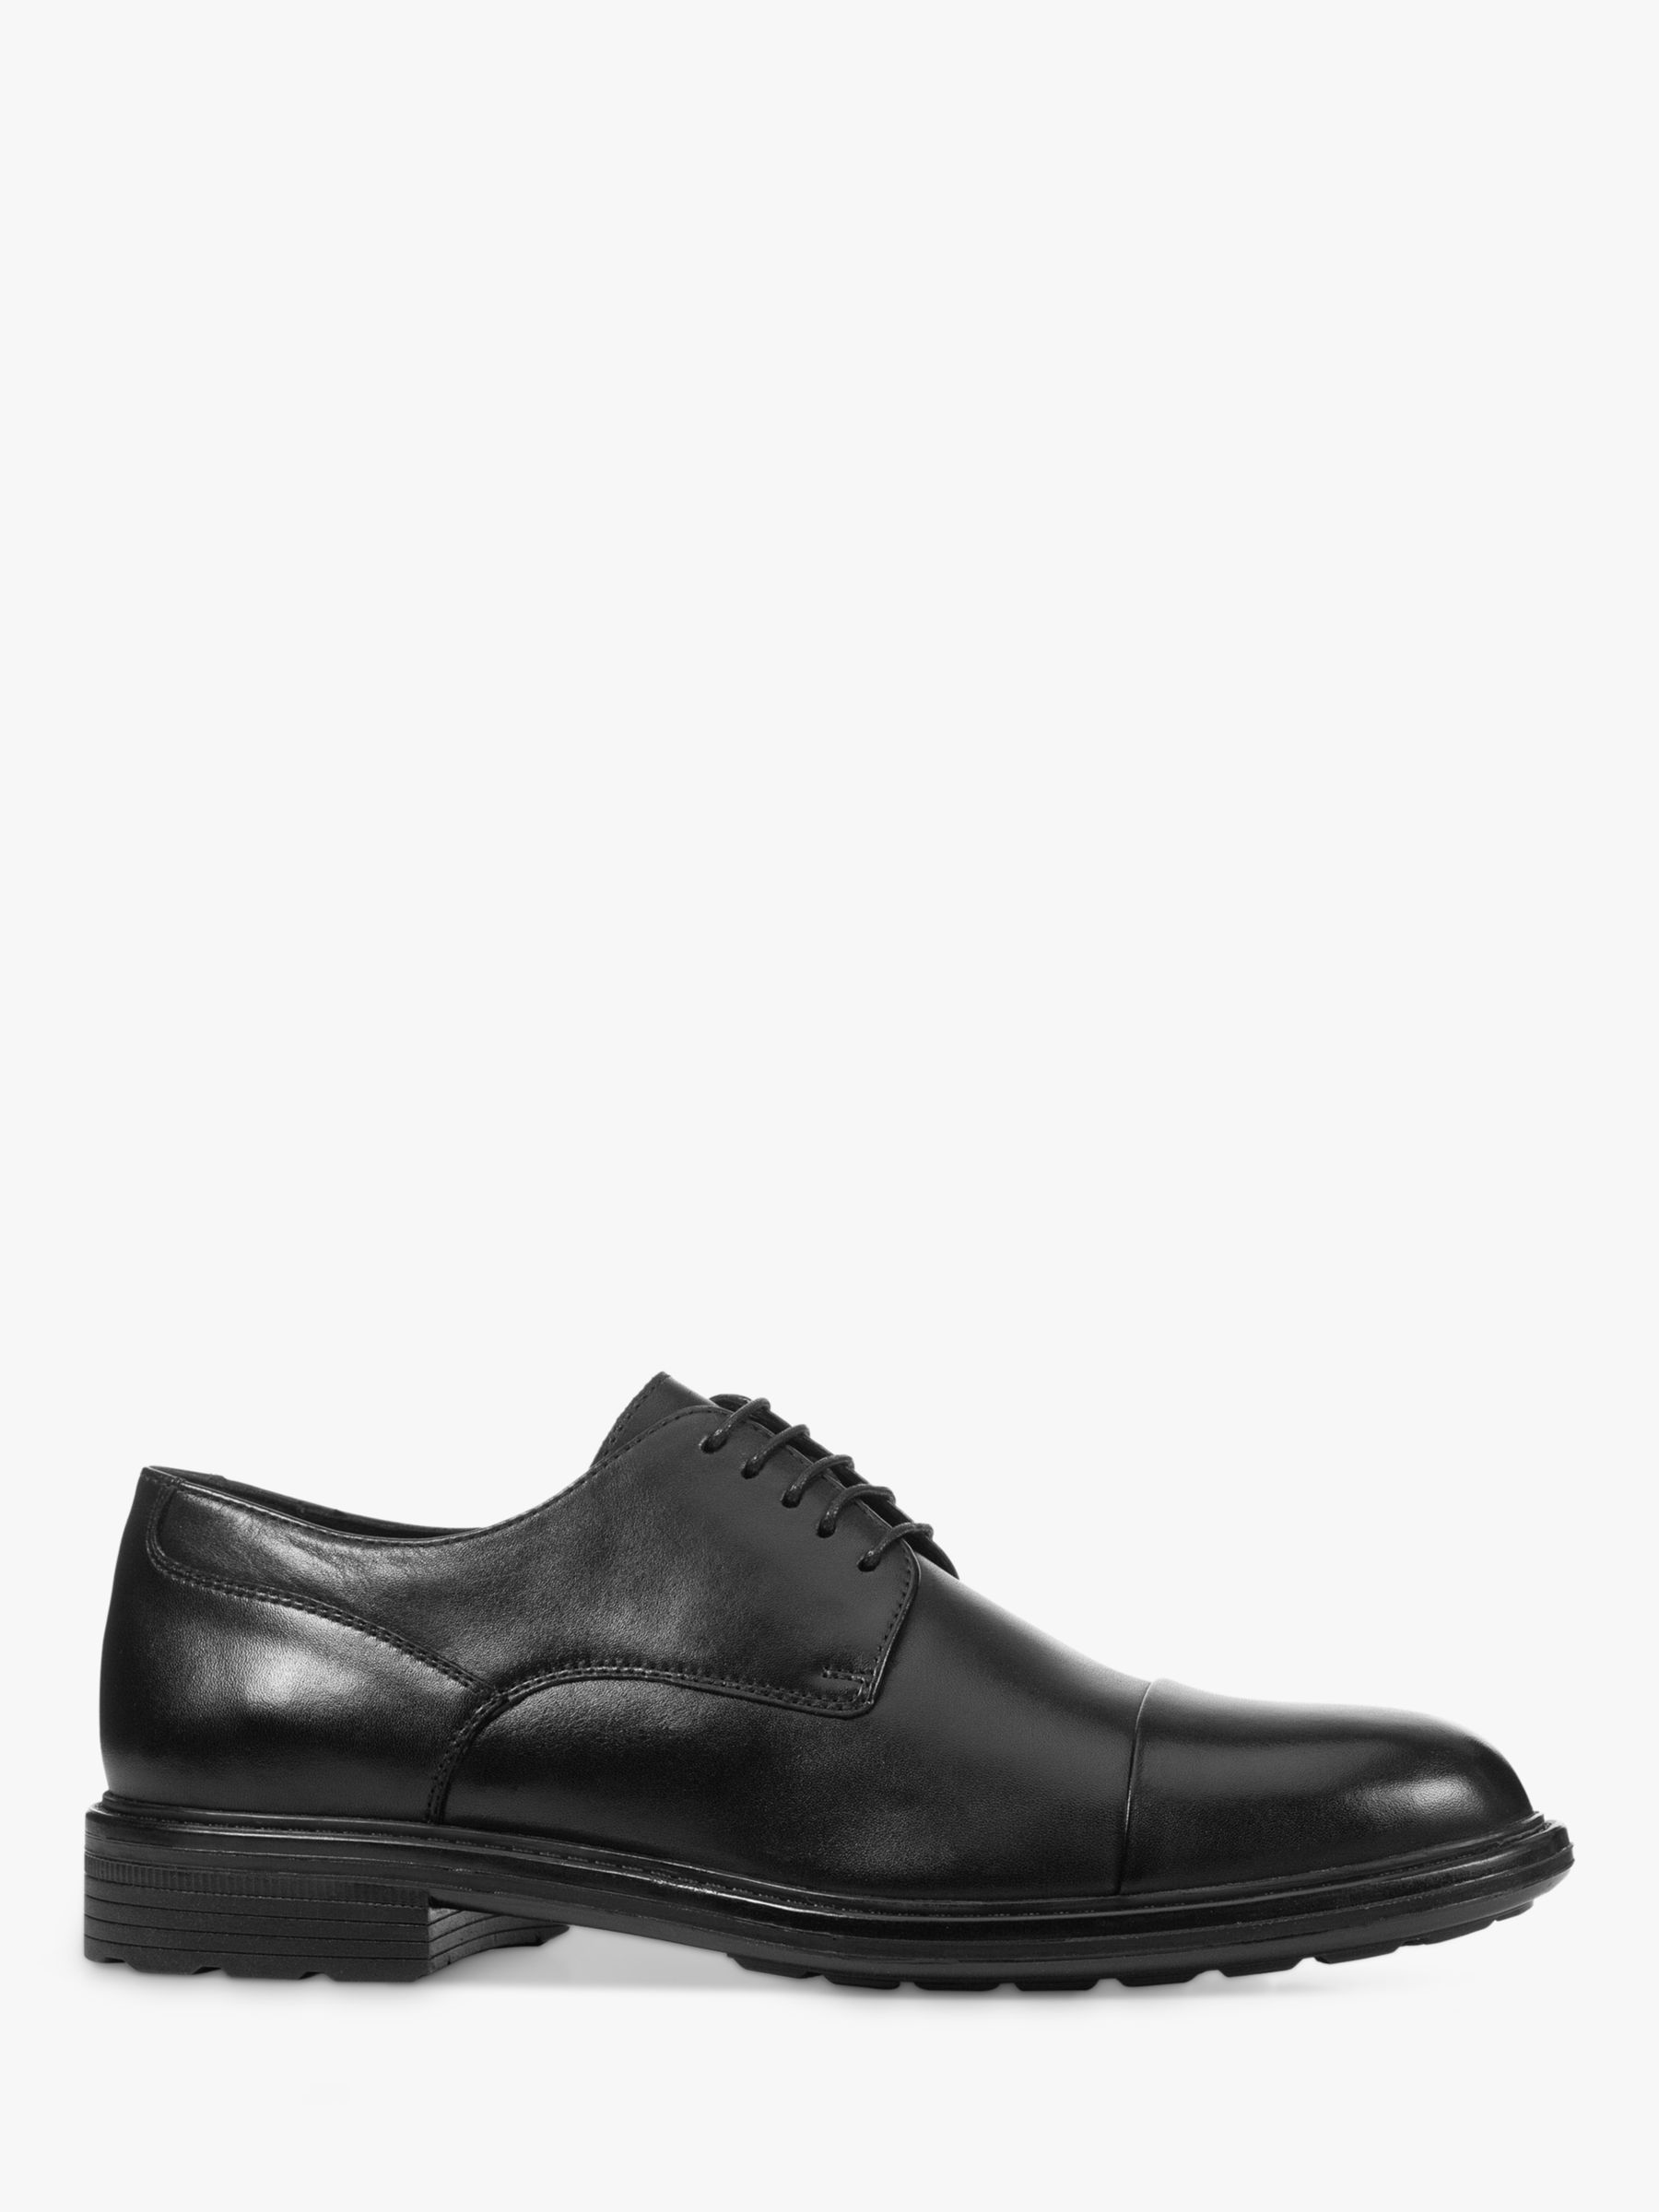 Geox Walk Leather Derby Shoes, Black at John Lewis &